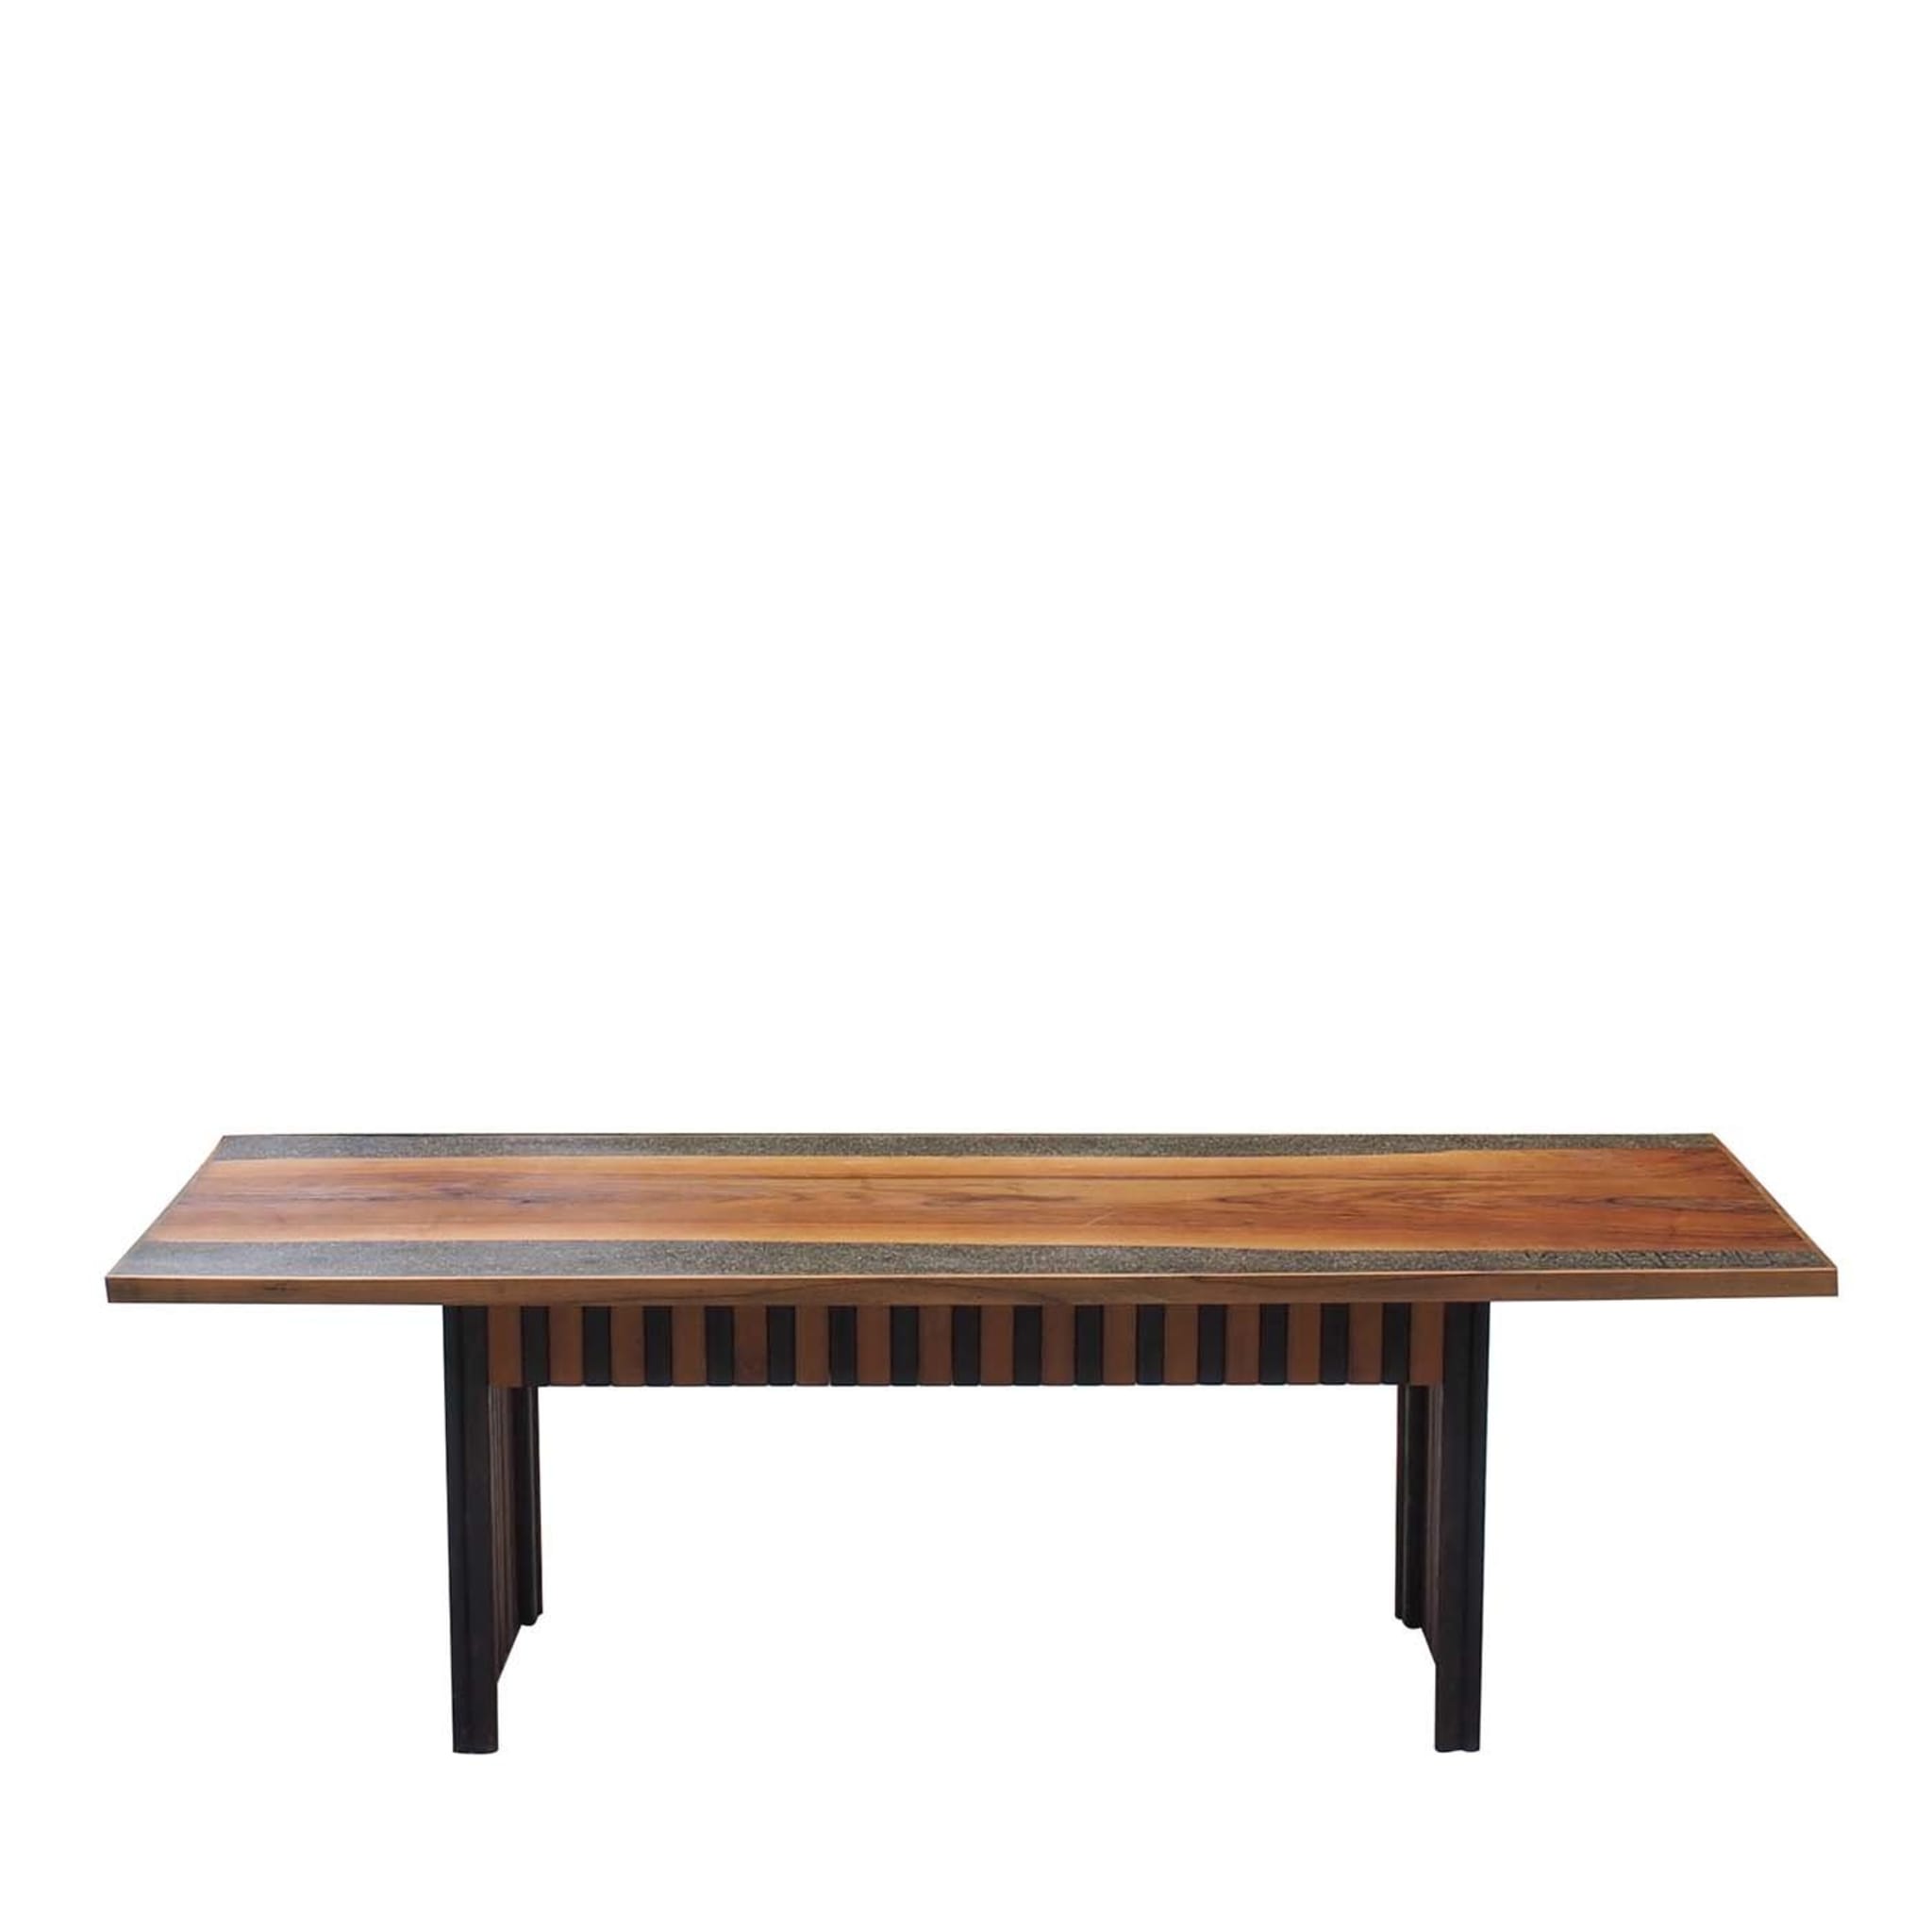 Walnut and Stones Dining Table - Main view